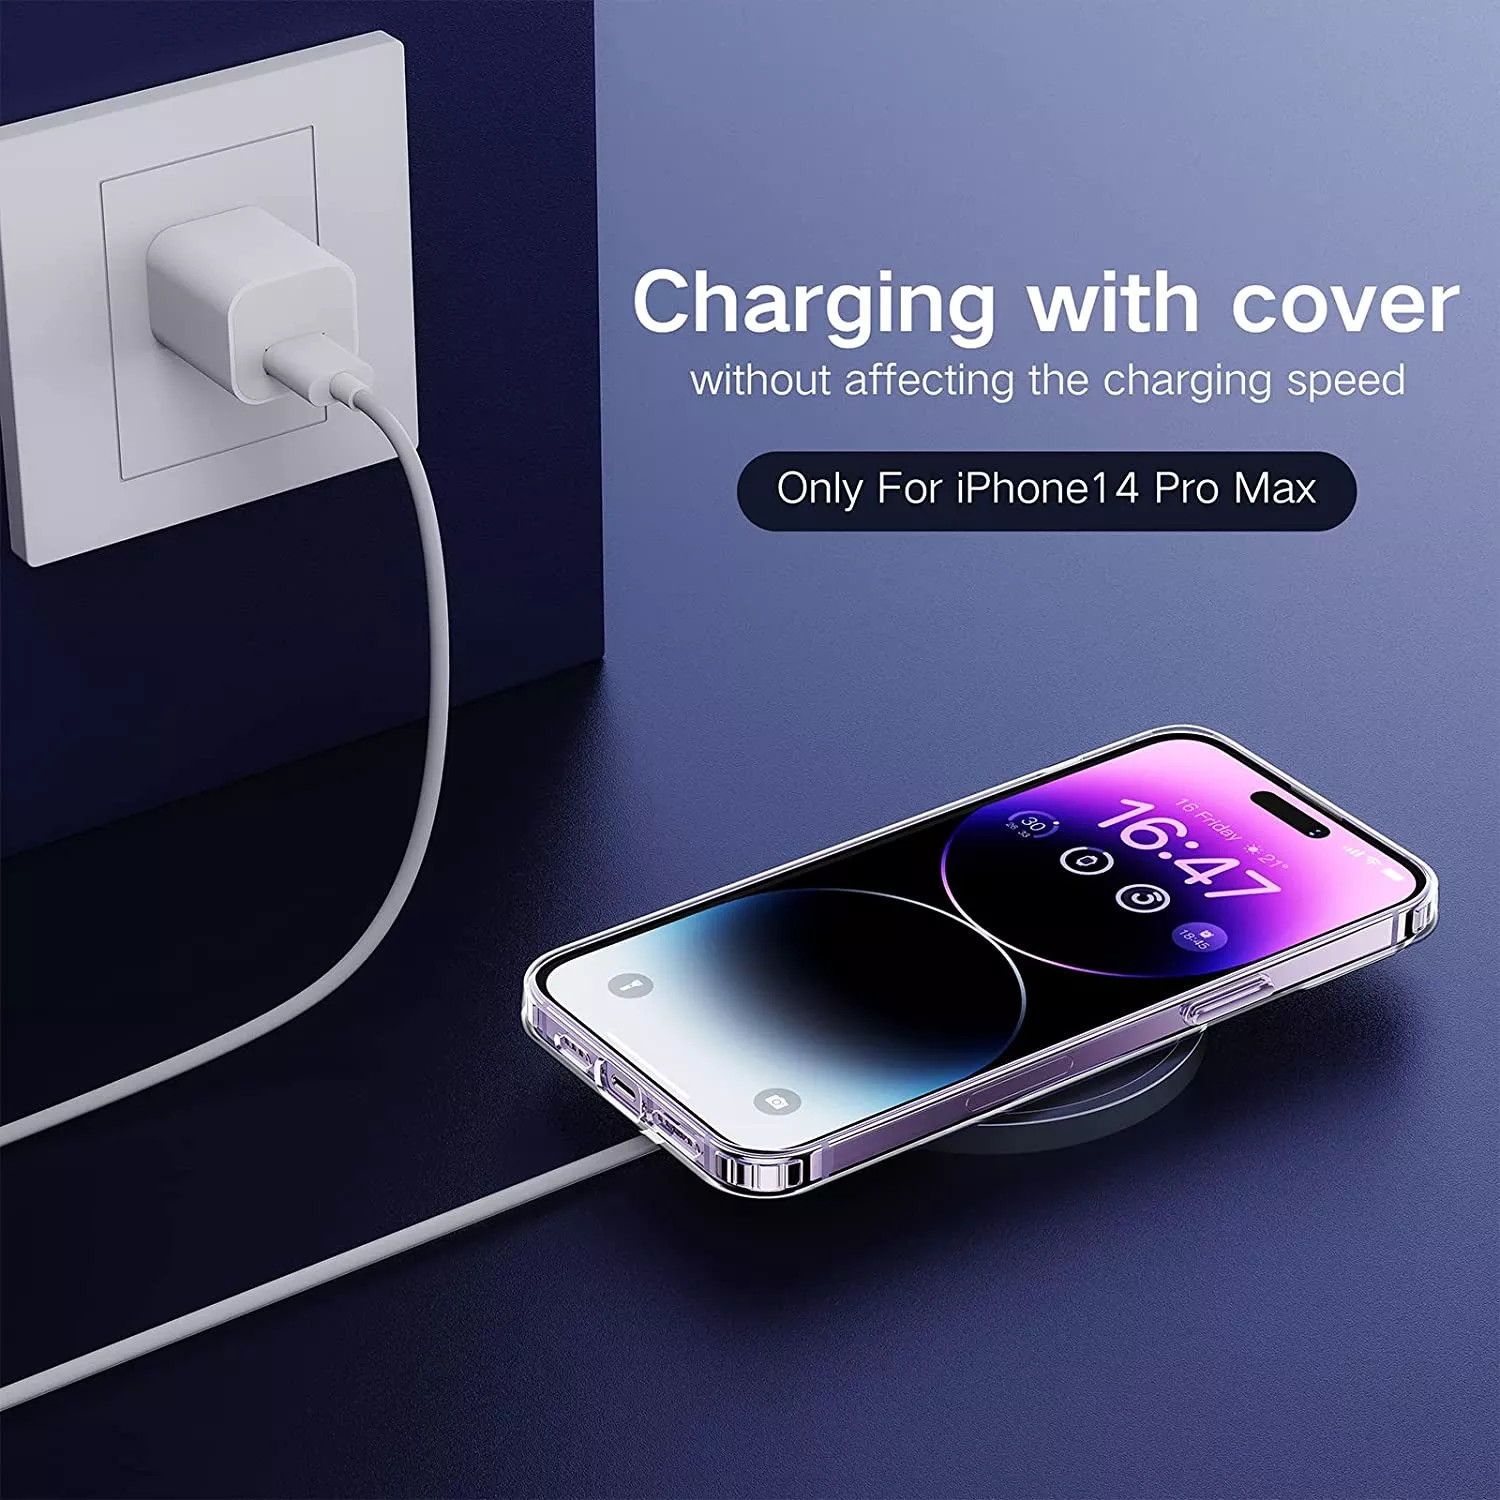 Ốp lưng chống sốc trong suốt hỗ trợ sạc Magsafe cho iPhone 14 Pro Max (6.7 inch) hiệu Memumi Magsafe Magetic Case